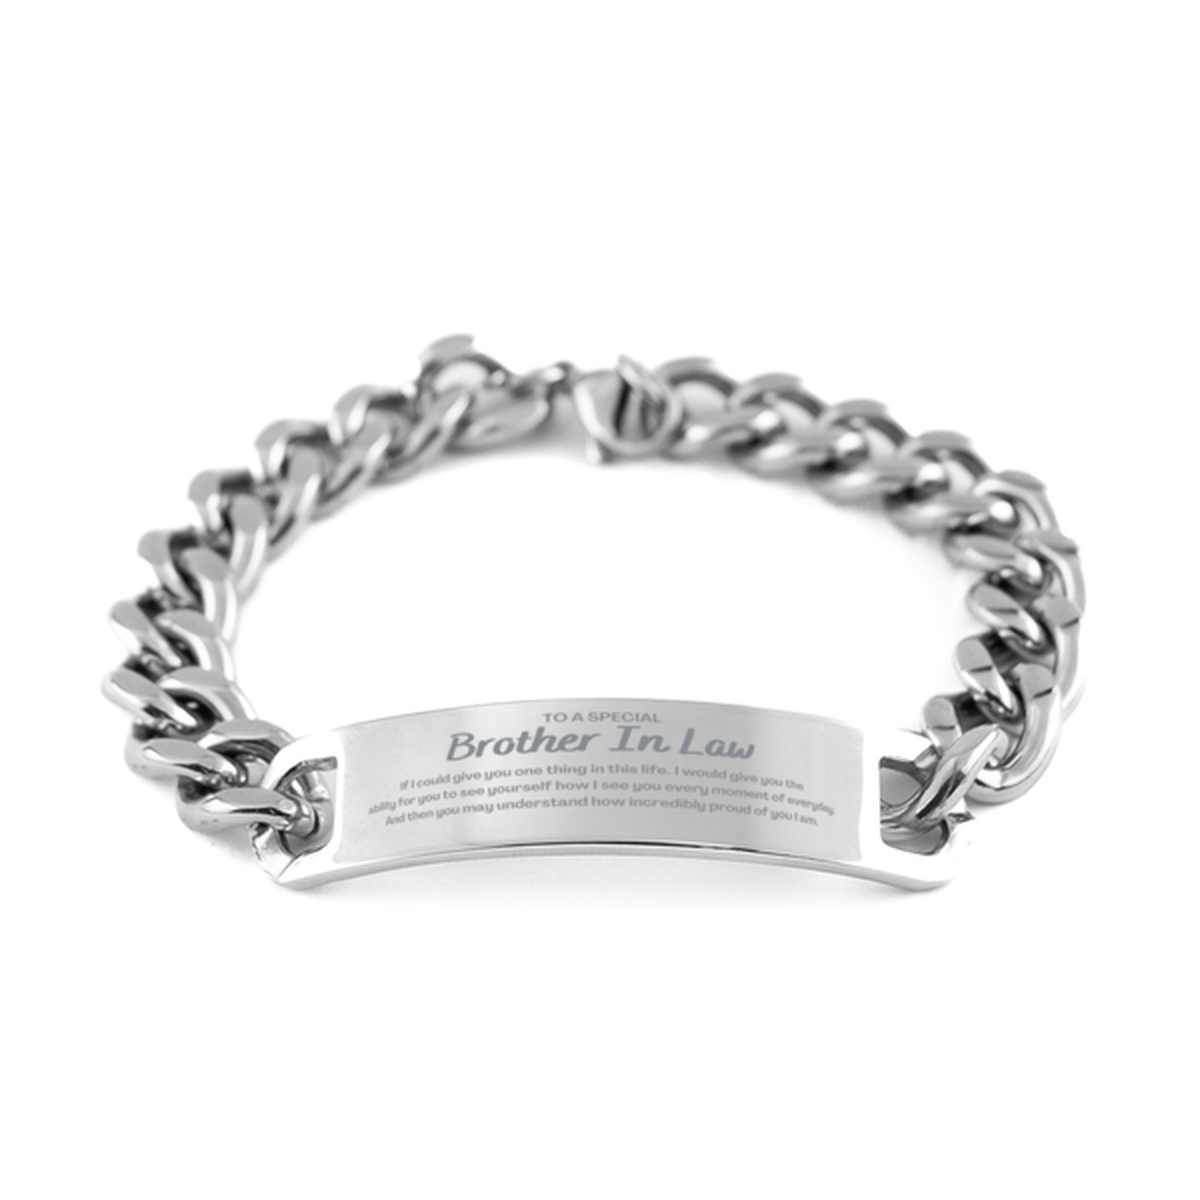 To My Brother In Law Cuban Chain Stainless Steel Bracelet, Gifts For Brother In Law Engraved, Inspirational Gifts for Christmas Birthday, Epic Gifts for Brother In Law To A Special Brother In Law how incredibly proud of you I am